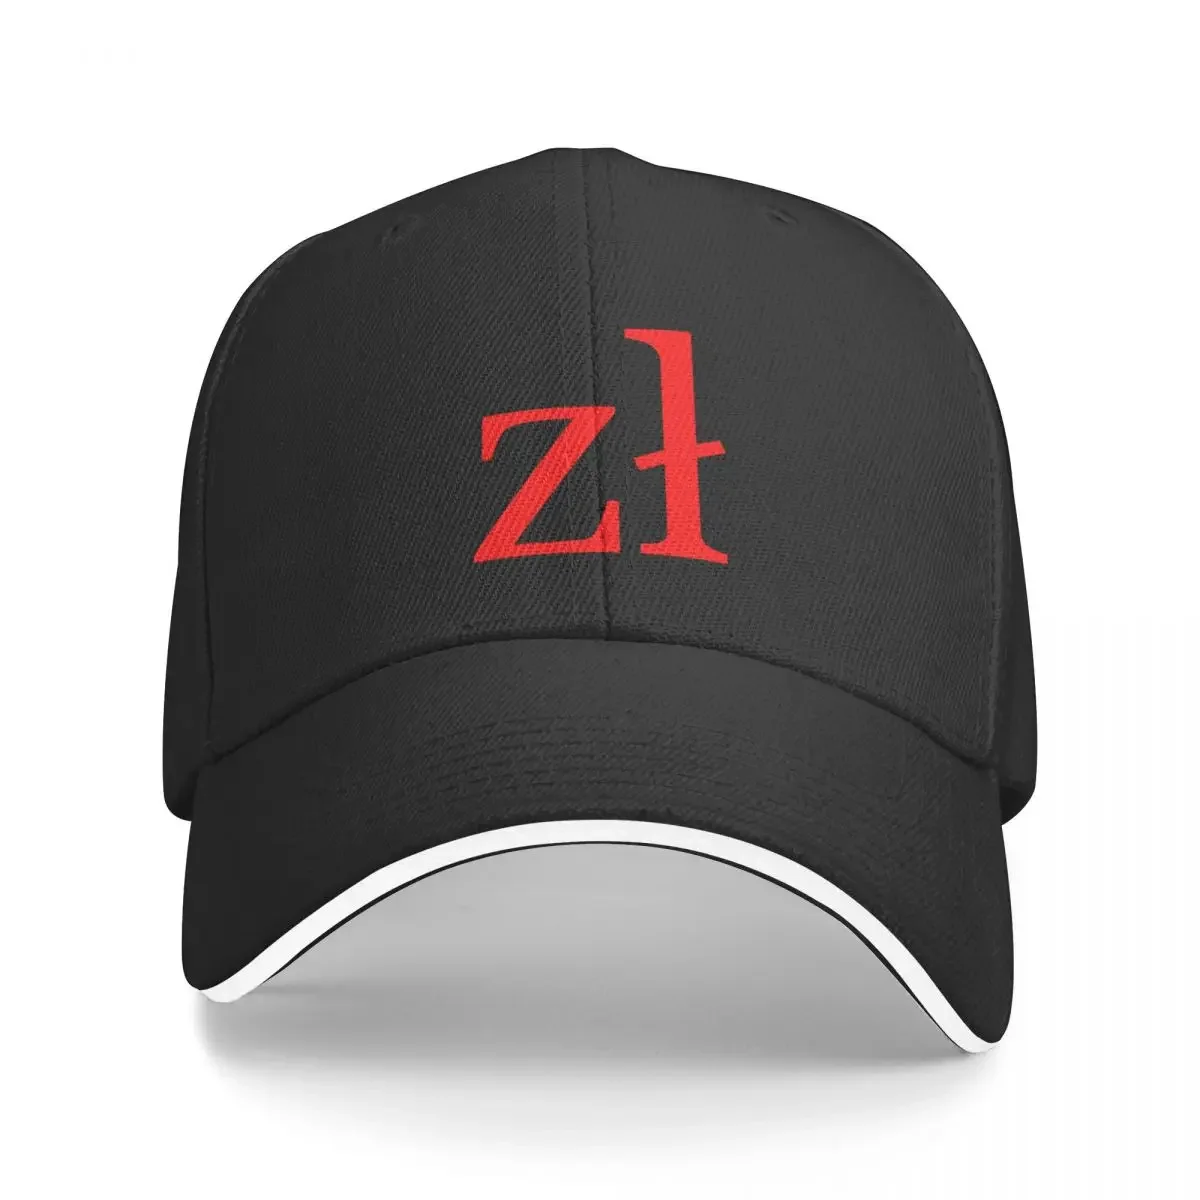 

Poland zloty currency symbol Baseball Cap Beach Outing Mountaineering Women Men's